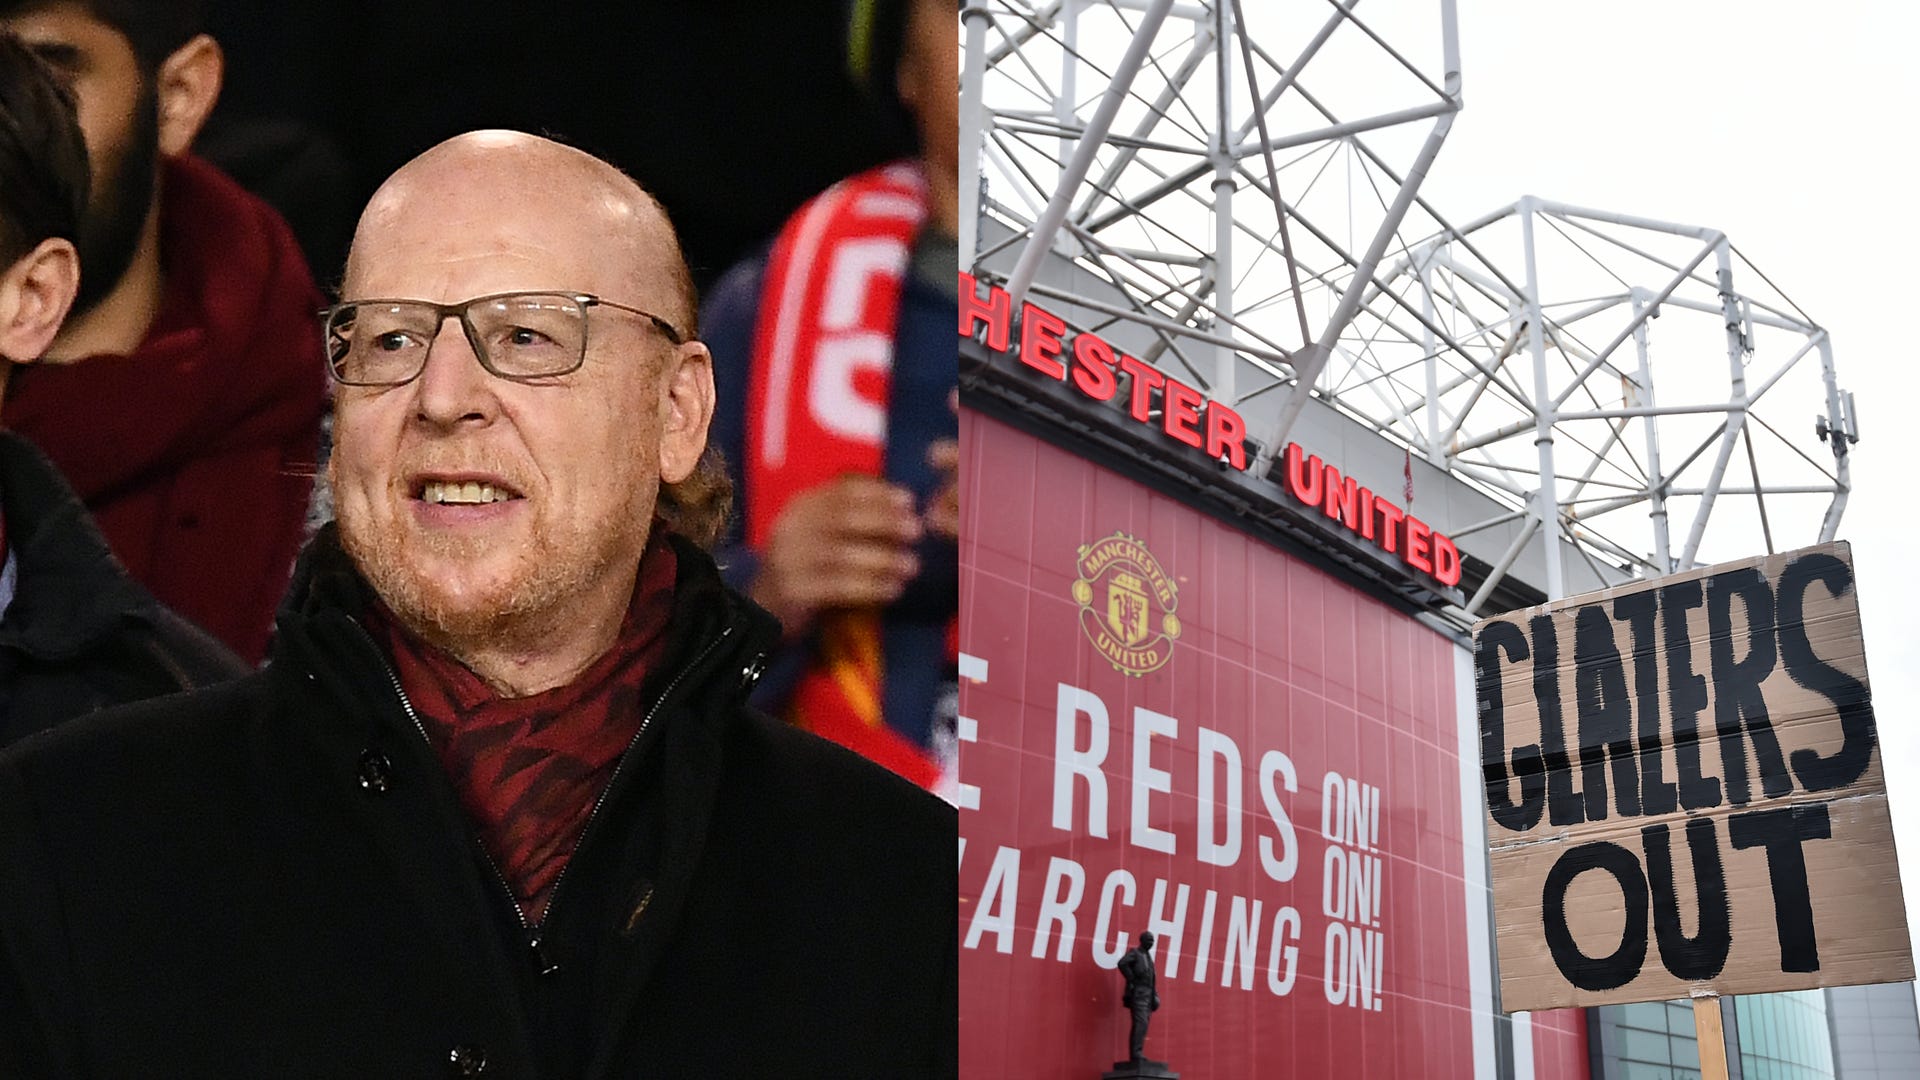 The Glazers Take A Page From Liverpool’s Owners